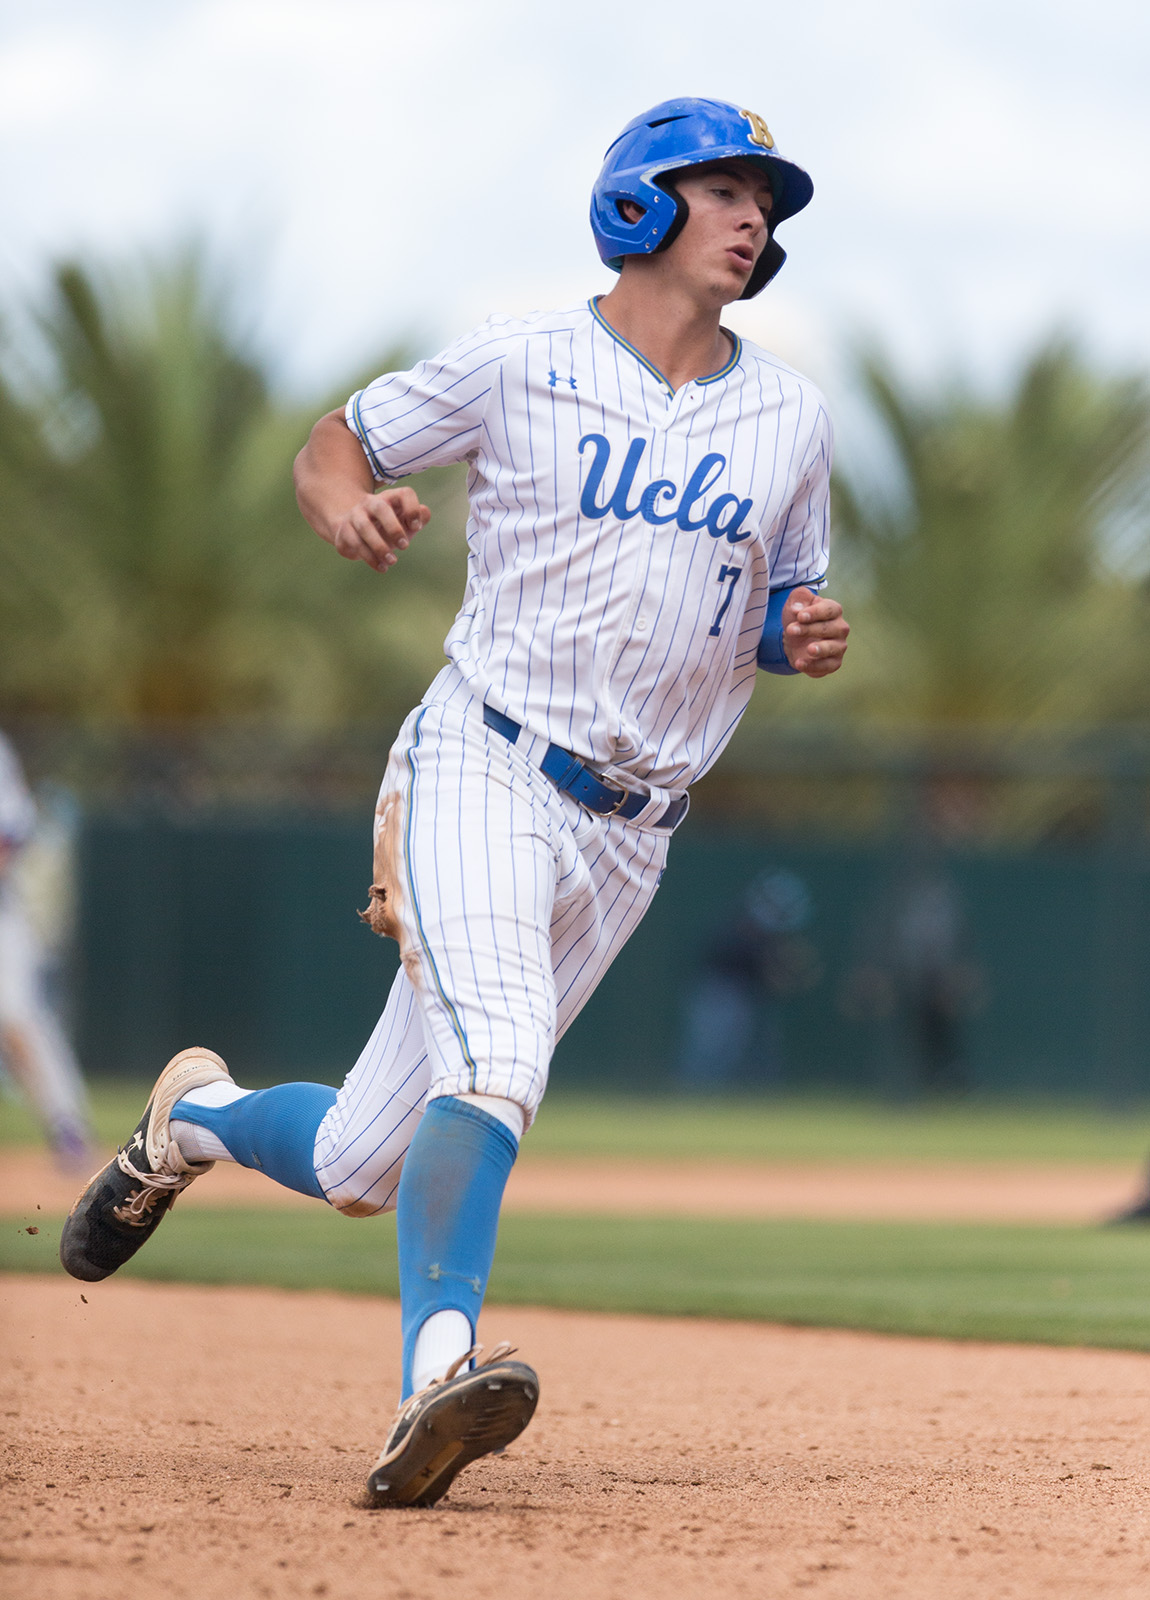 Three Bruins selected during first night of 2019 MLB Draft - Daily Bruin